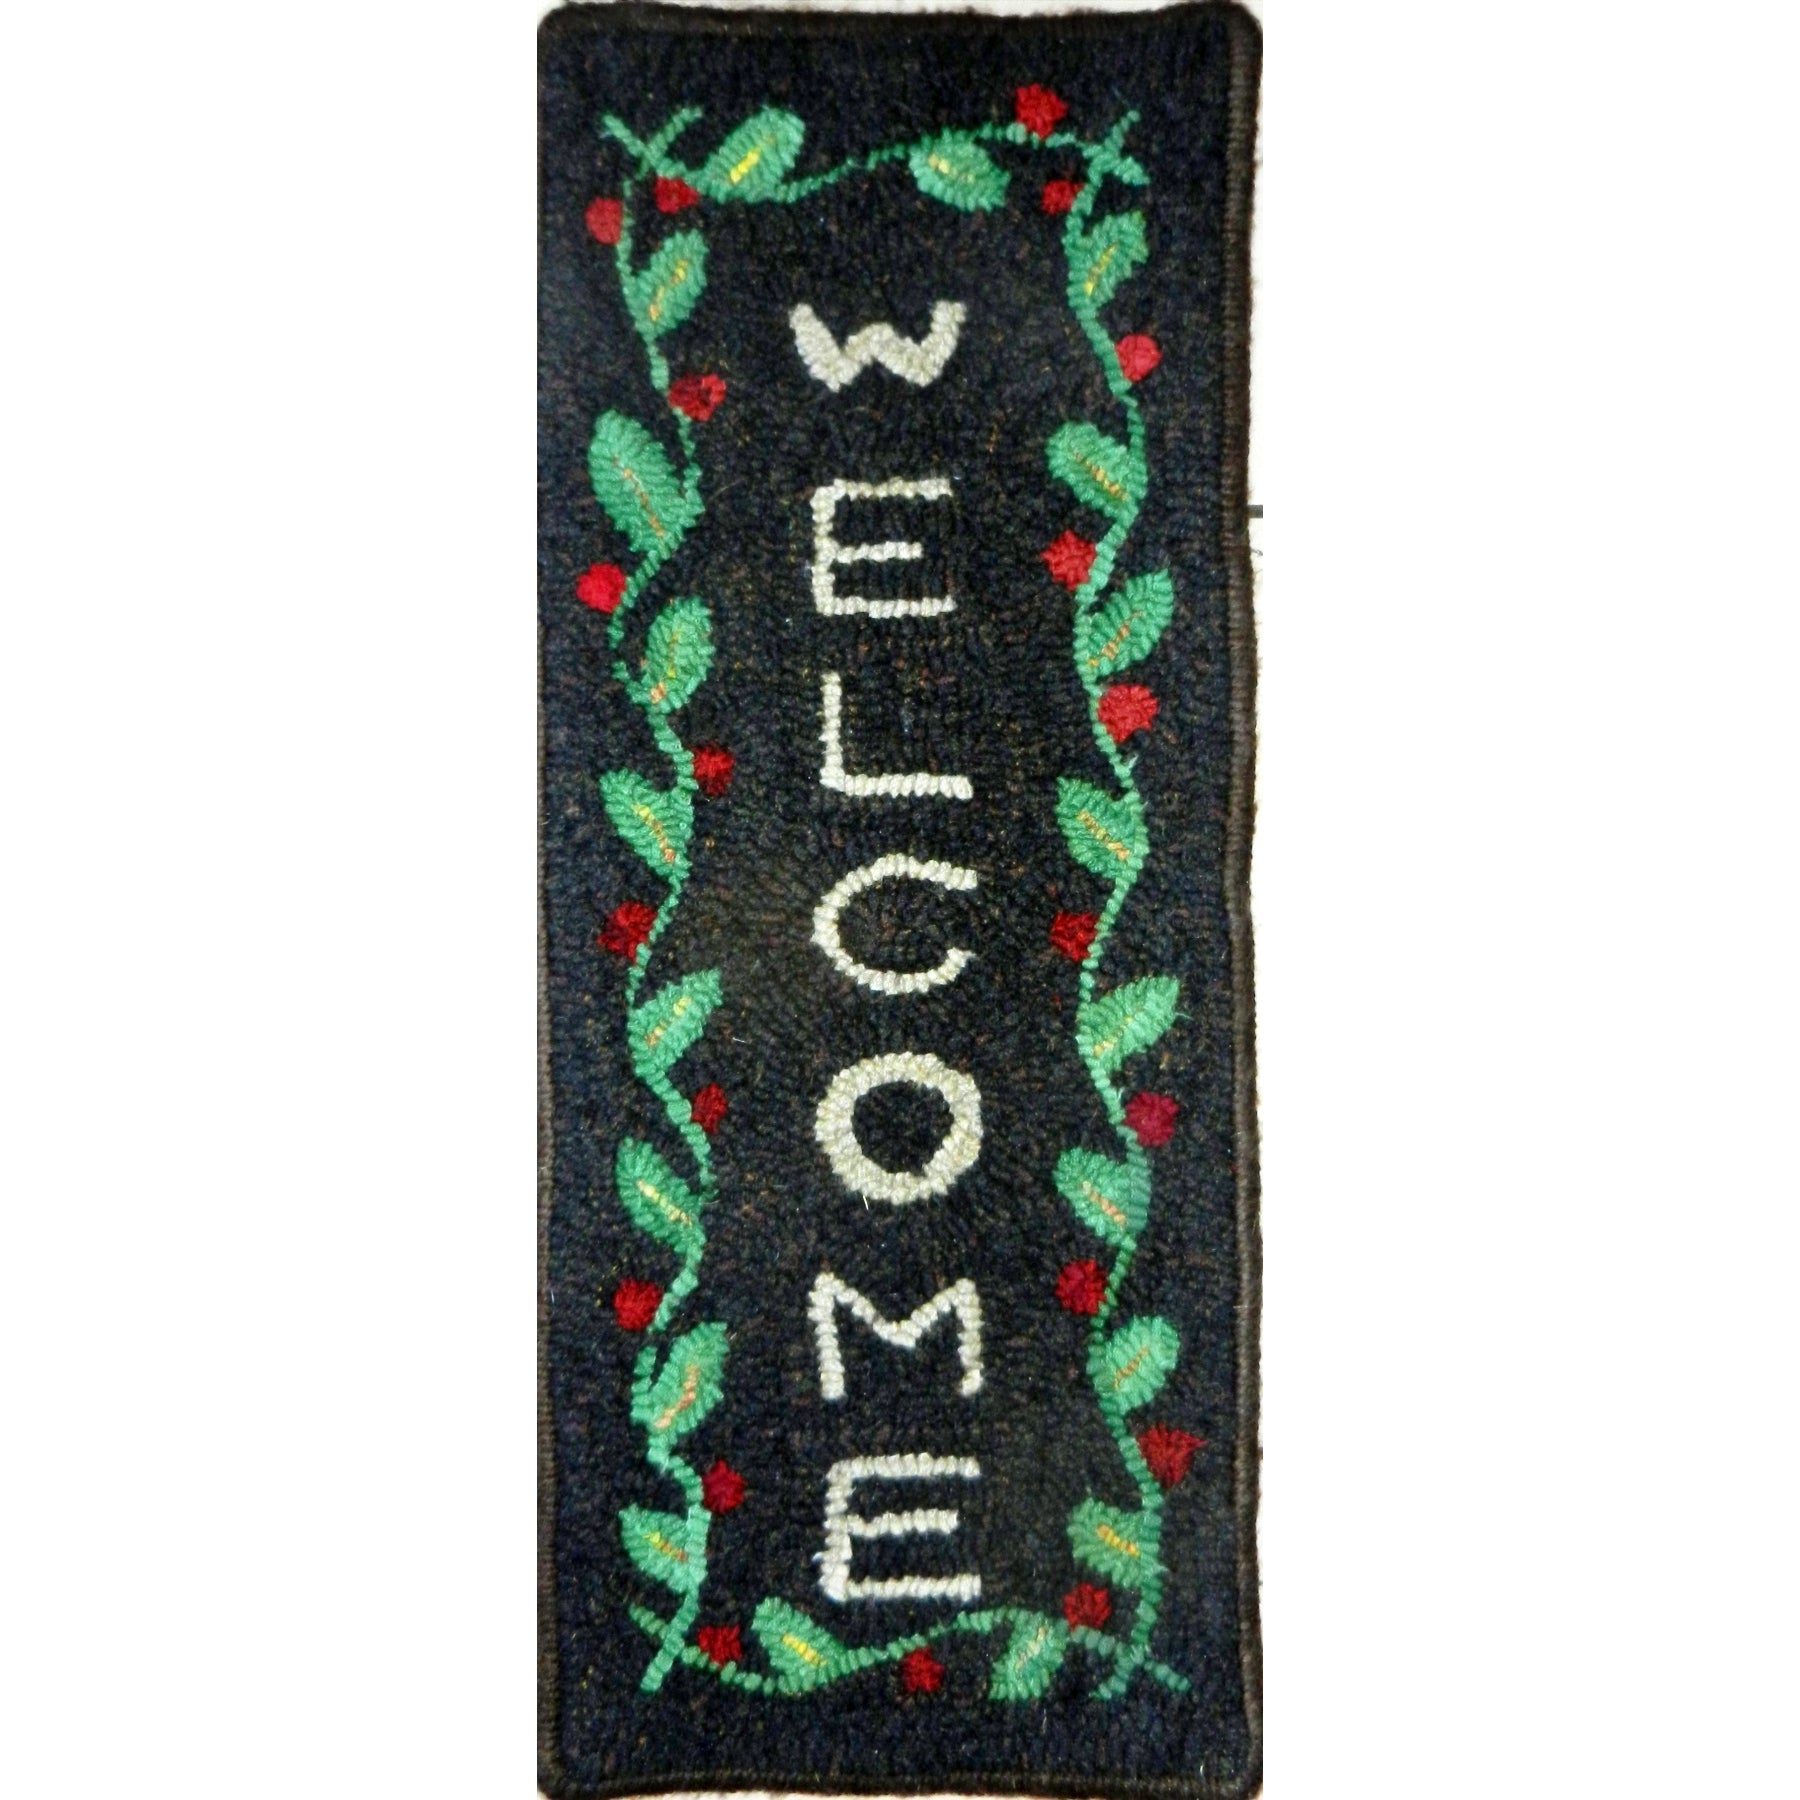 Welcome, rug hooked by Carolyn Cooke